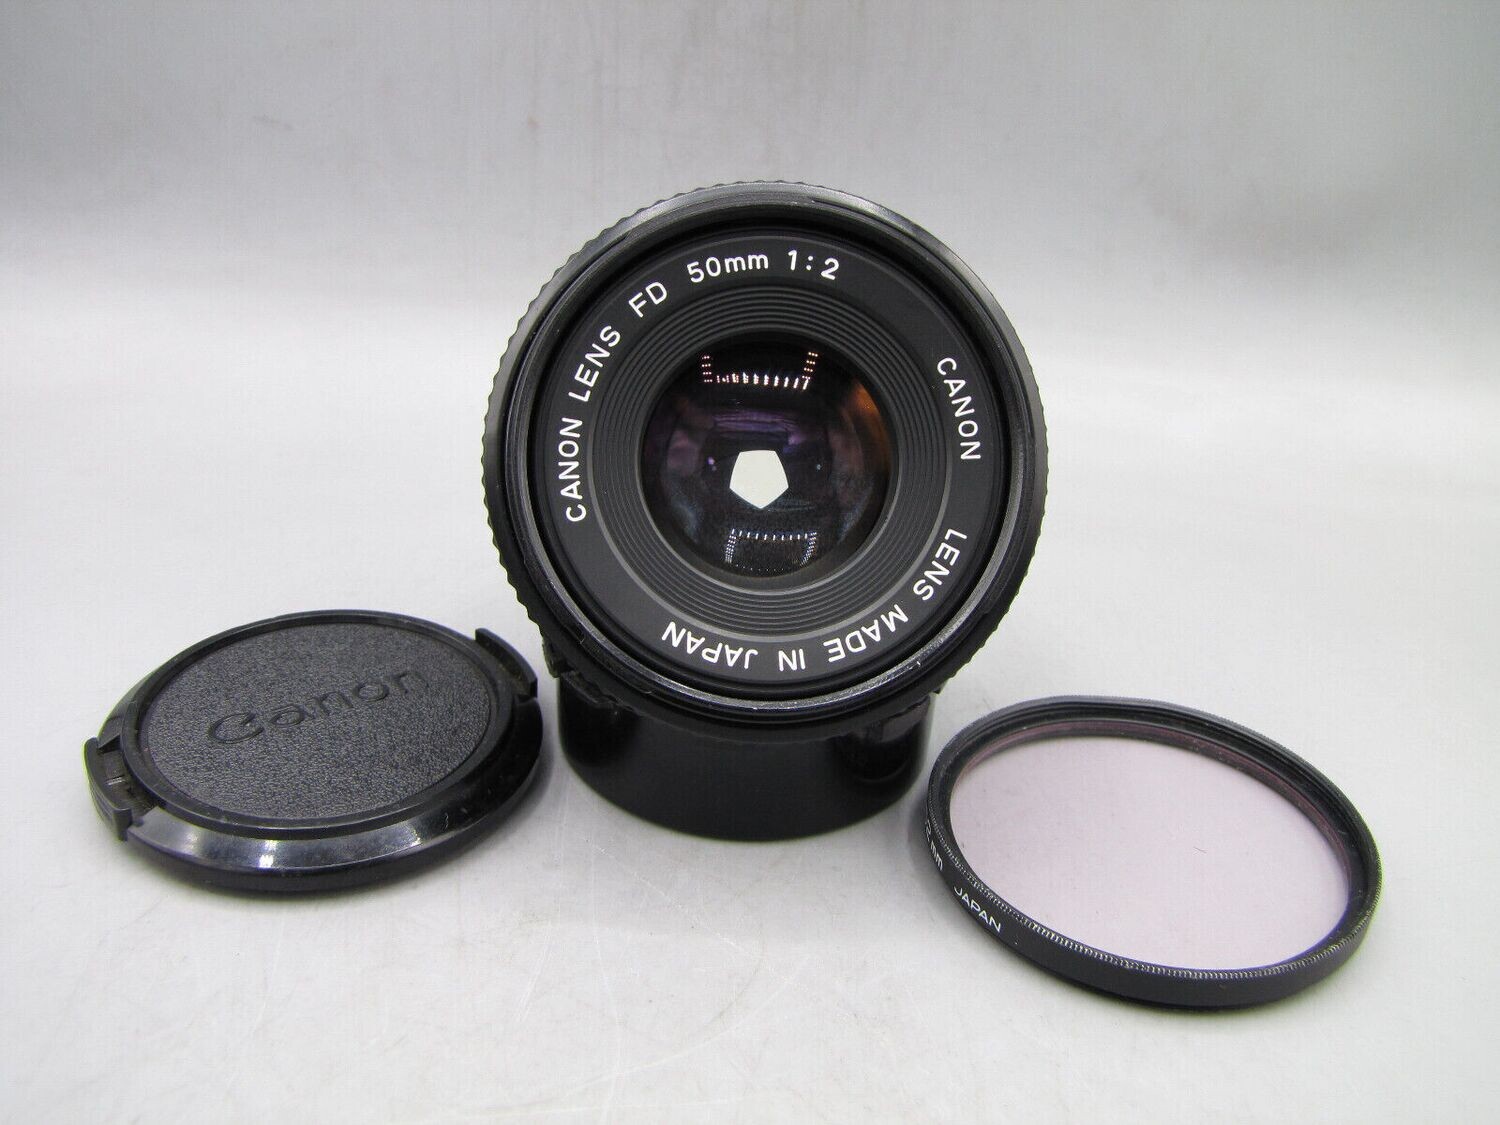 Canon FD 50mm 1:2 Lens for SLR cameras Untested